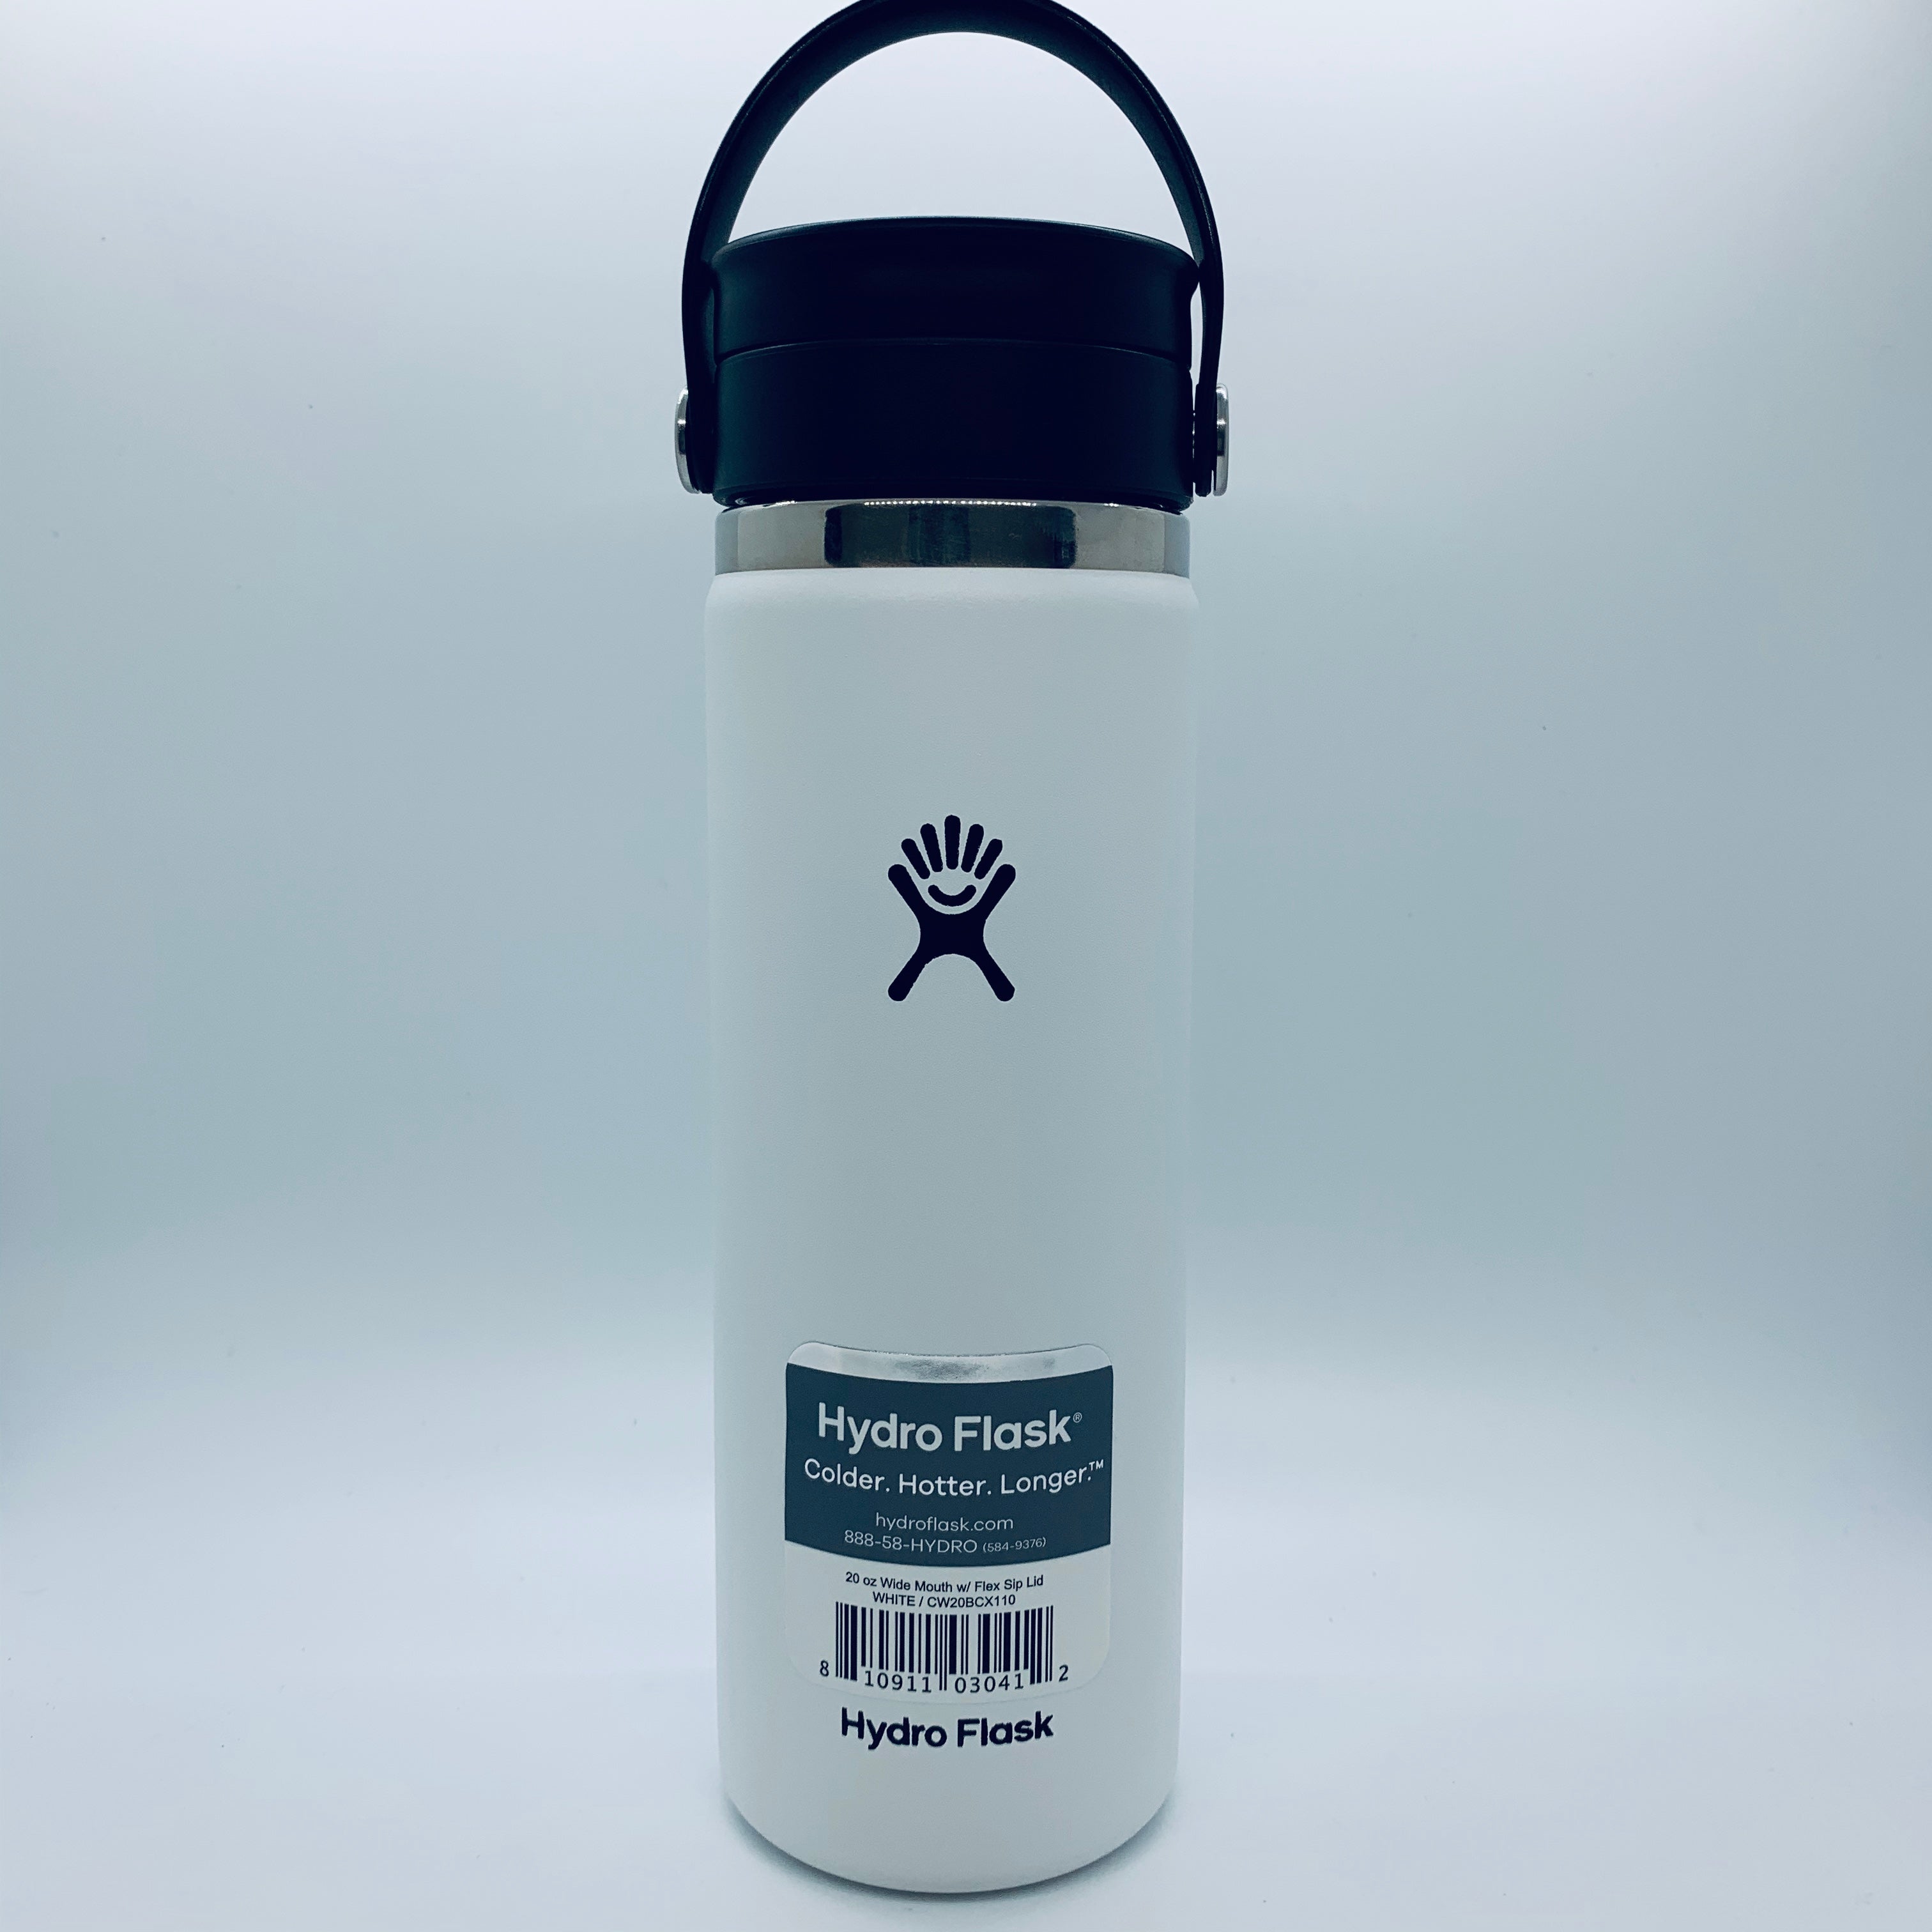 20 oz. Wide-Mouth Coffee Flask